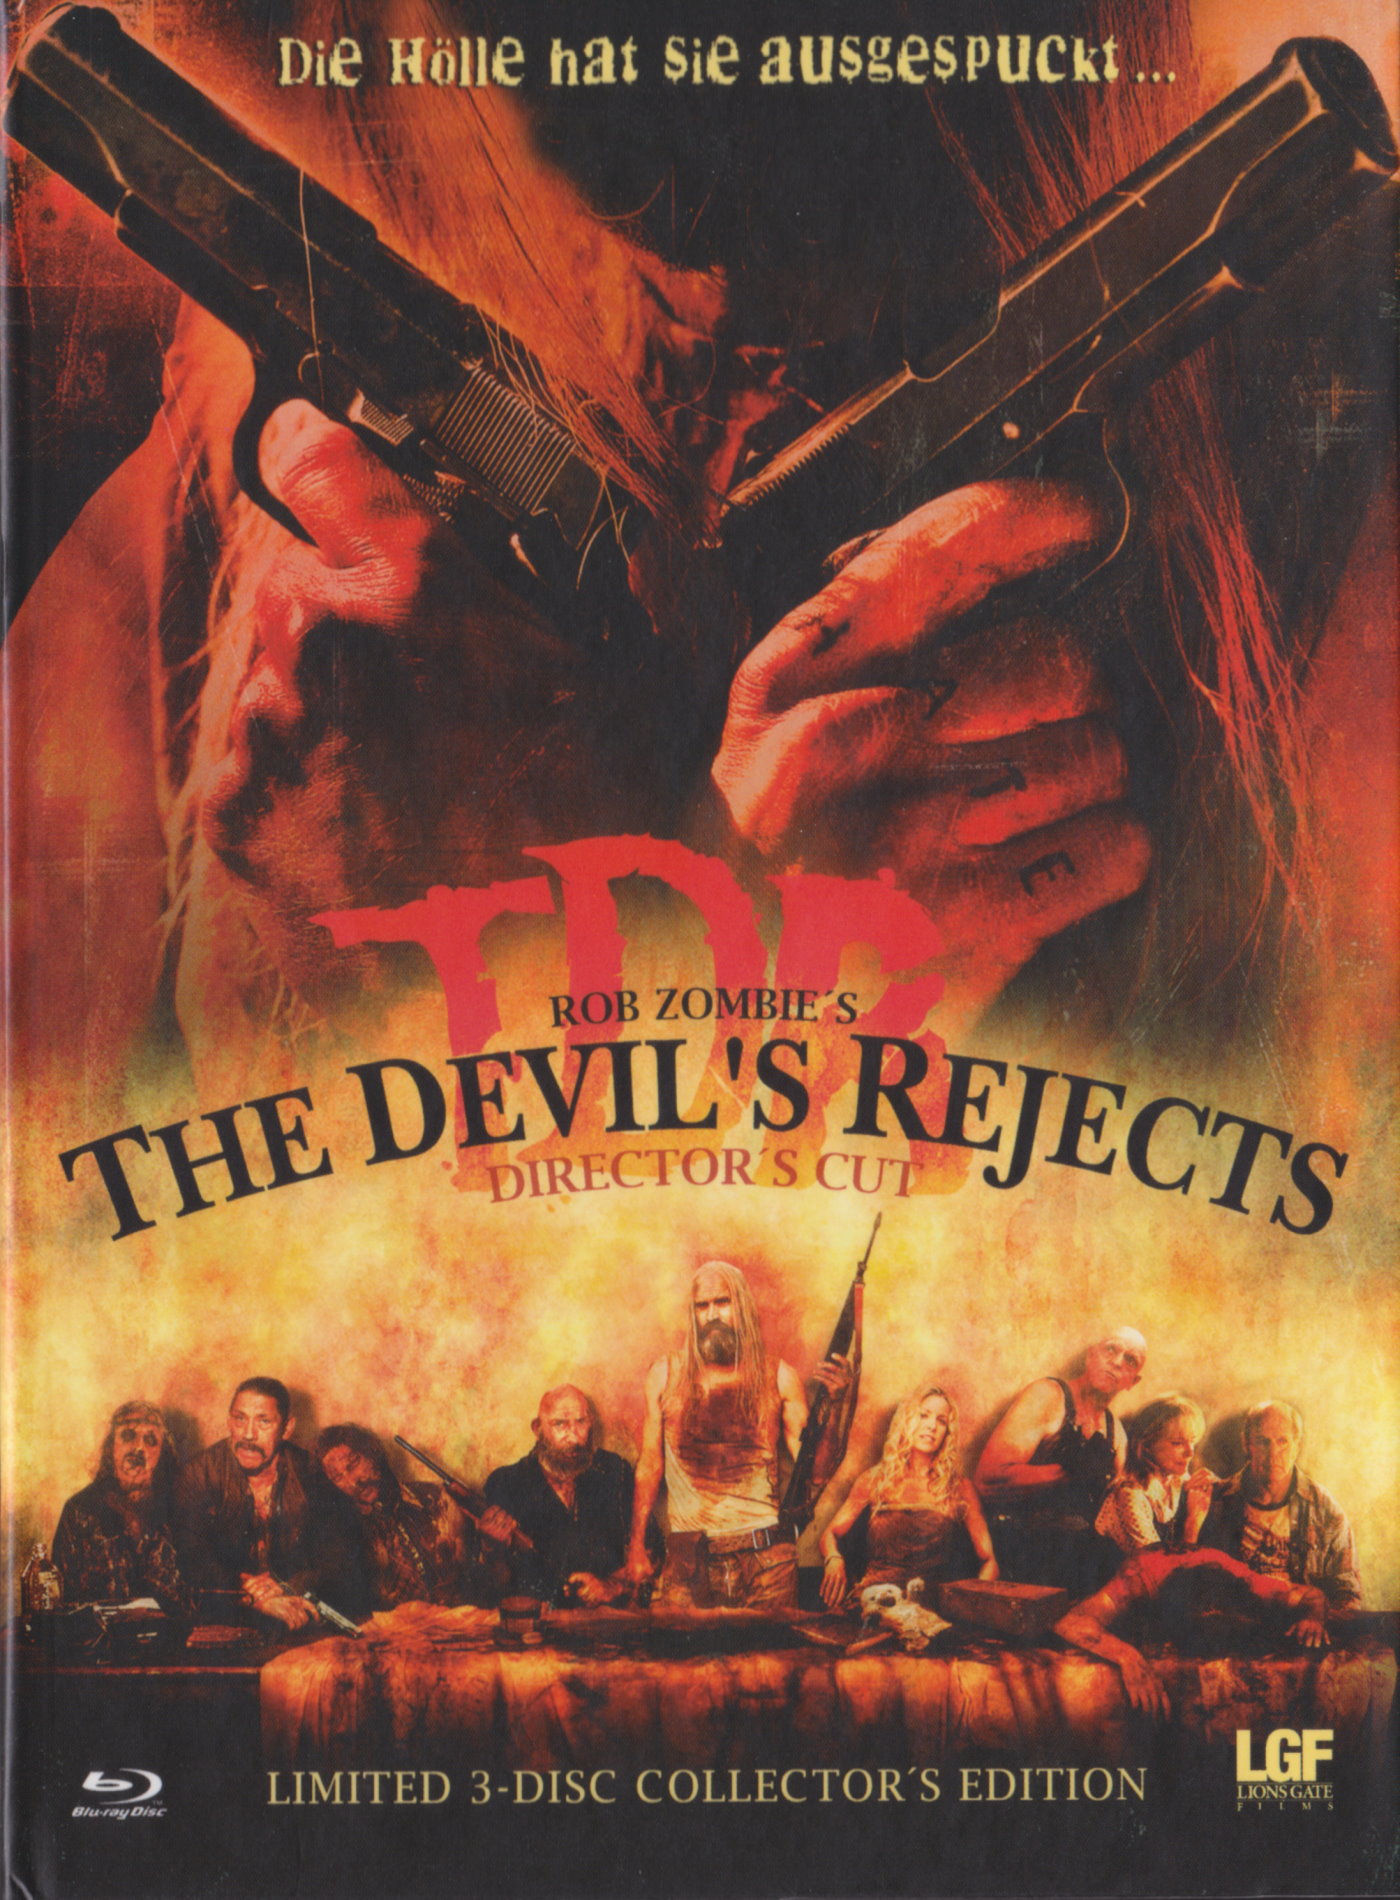 Cover - TDR - The Devil's Rejects.jpg